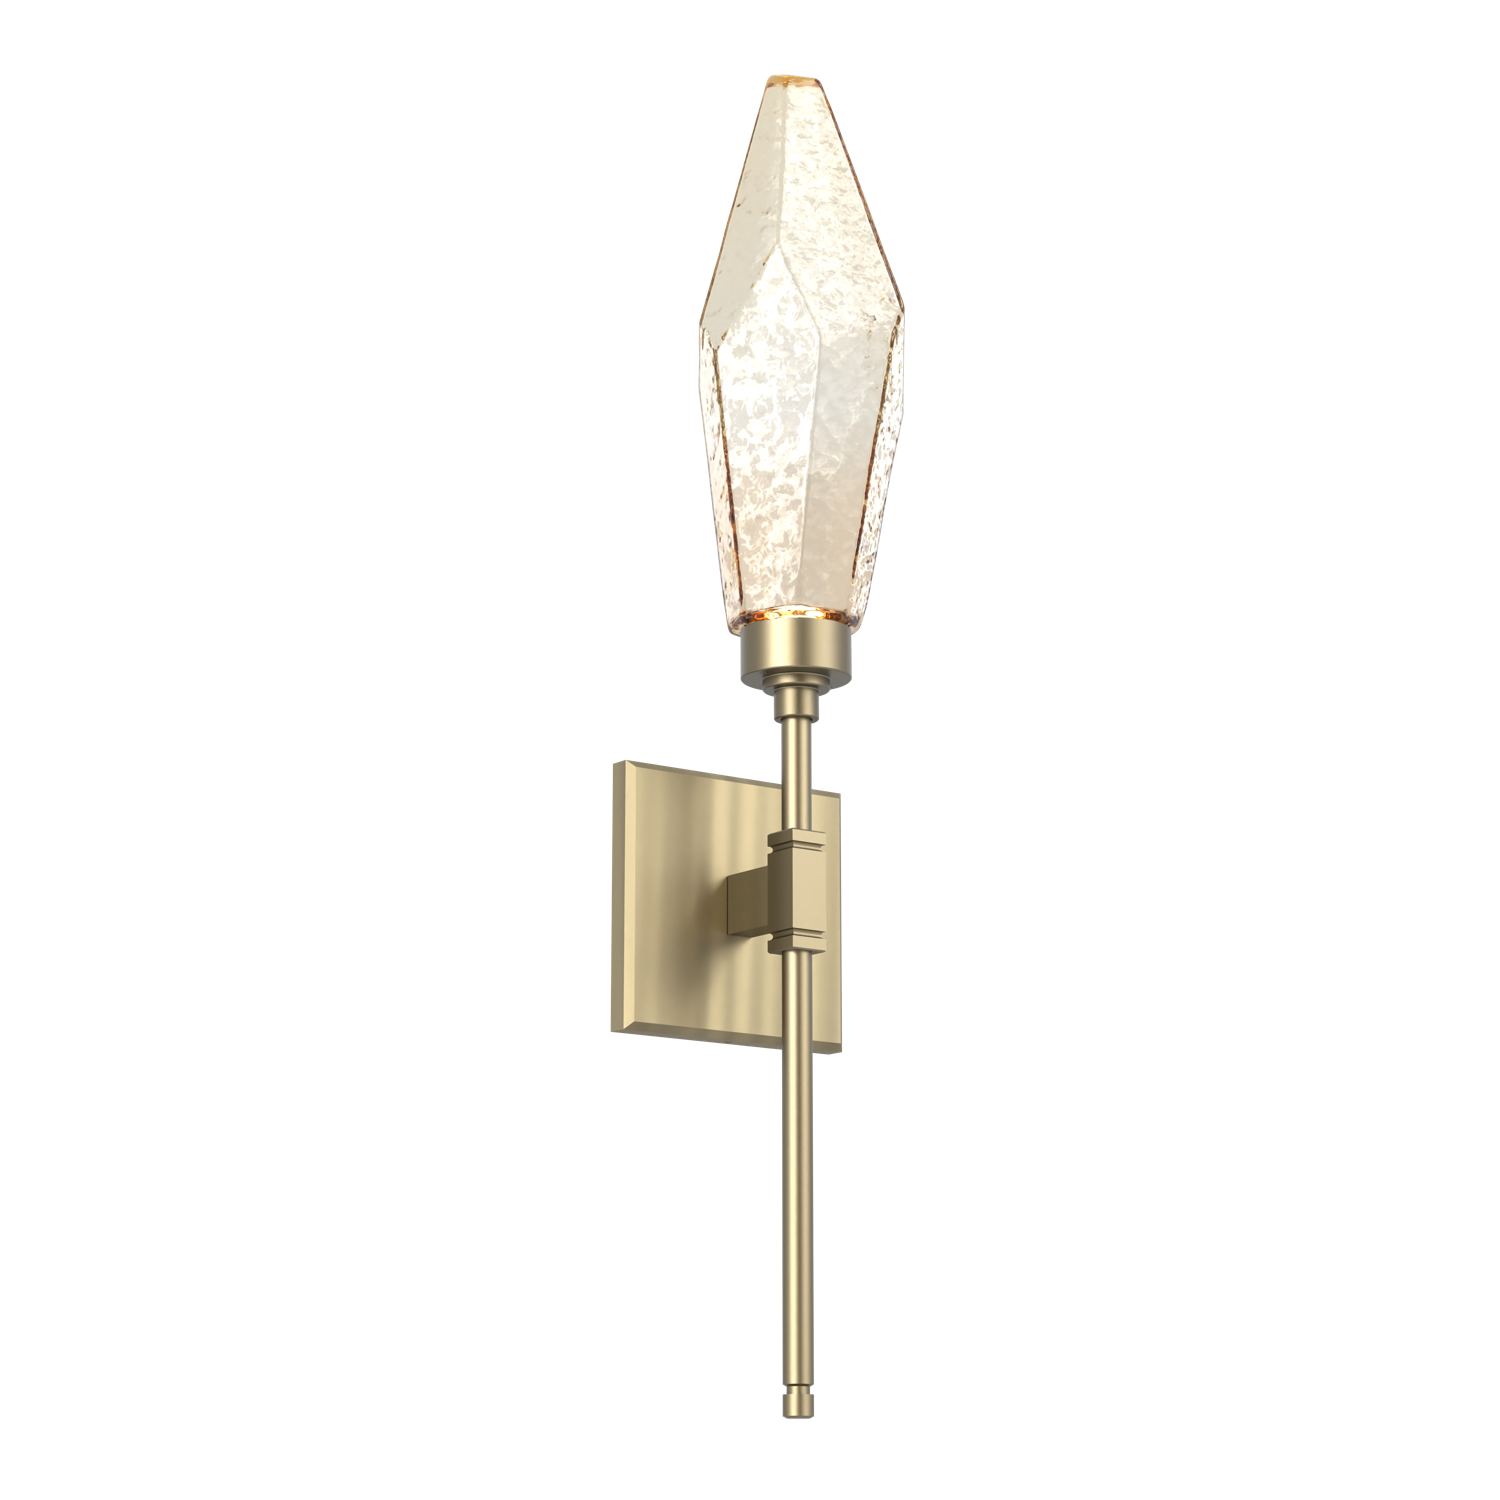 IDB0050-04-HB-CA-Hammerton-Studio-Rock-Crystal-ada-certified-belvedere-wall-sconce-with-heritage-brass-finish-and-chilled-amber-blown-glass-shades-and-LED-lamping